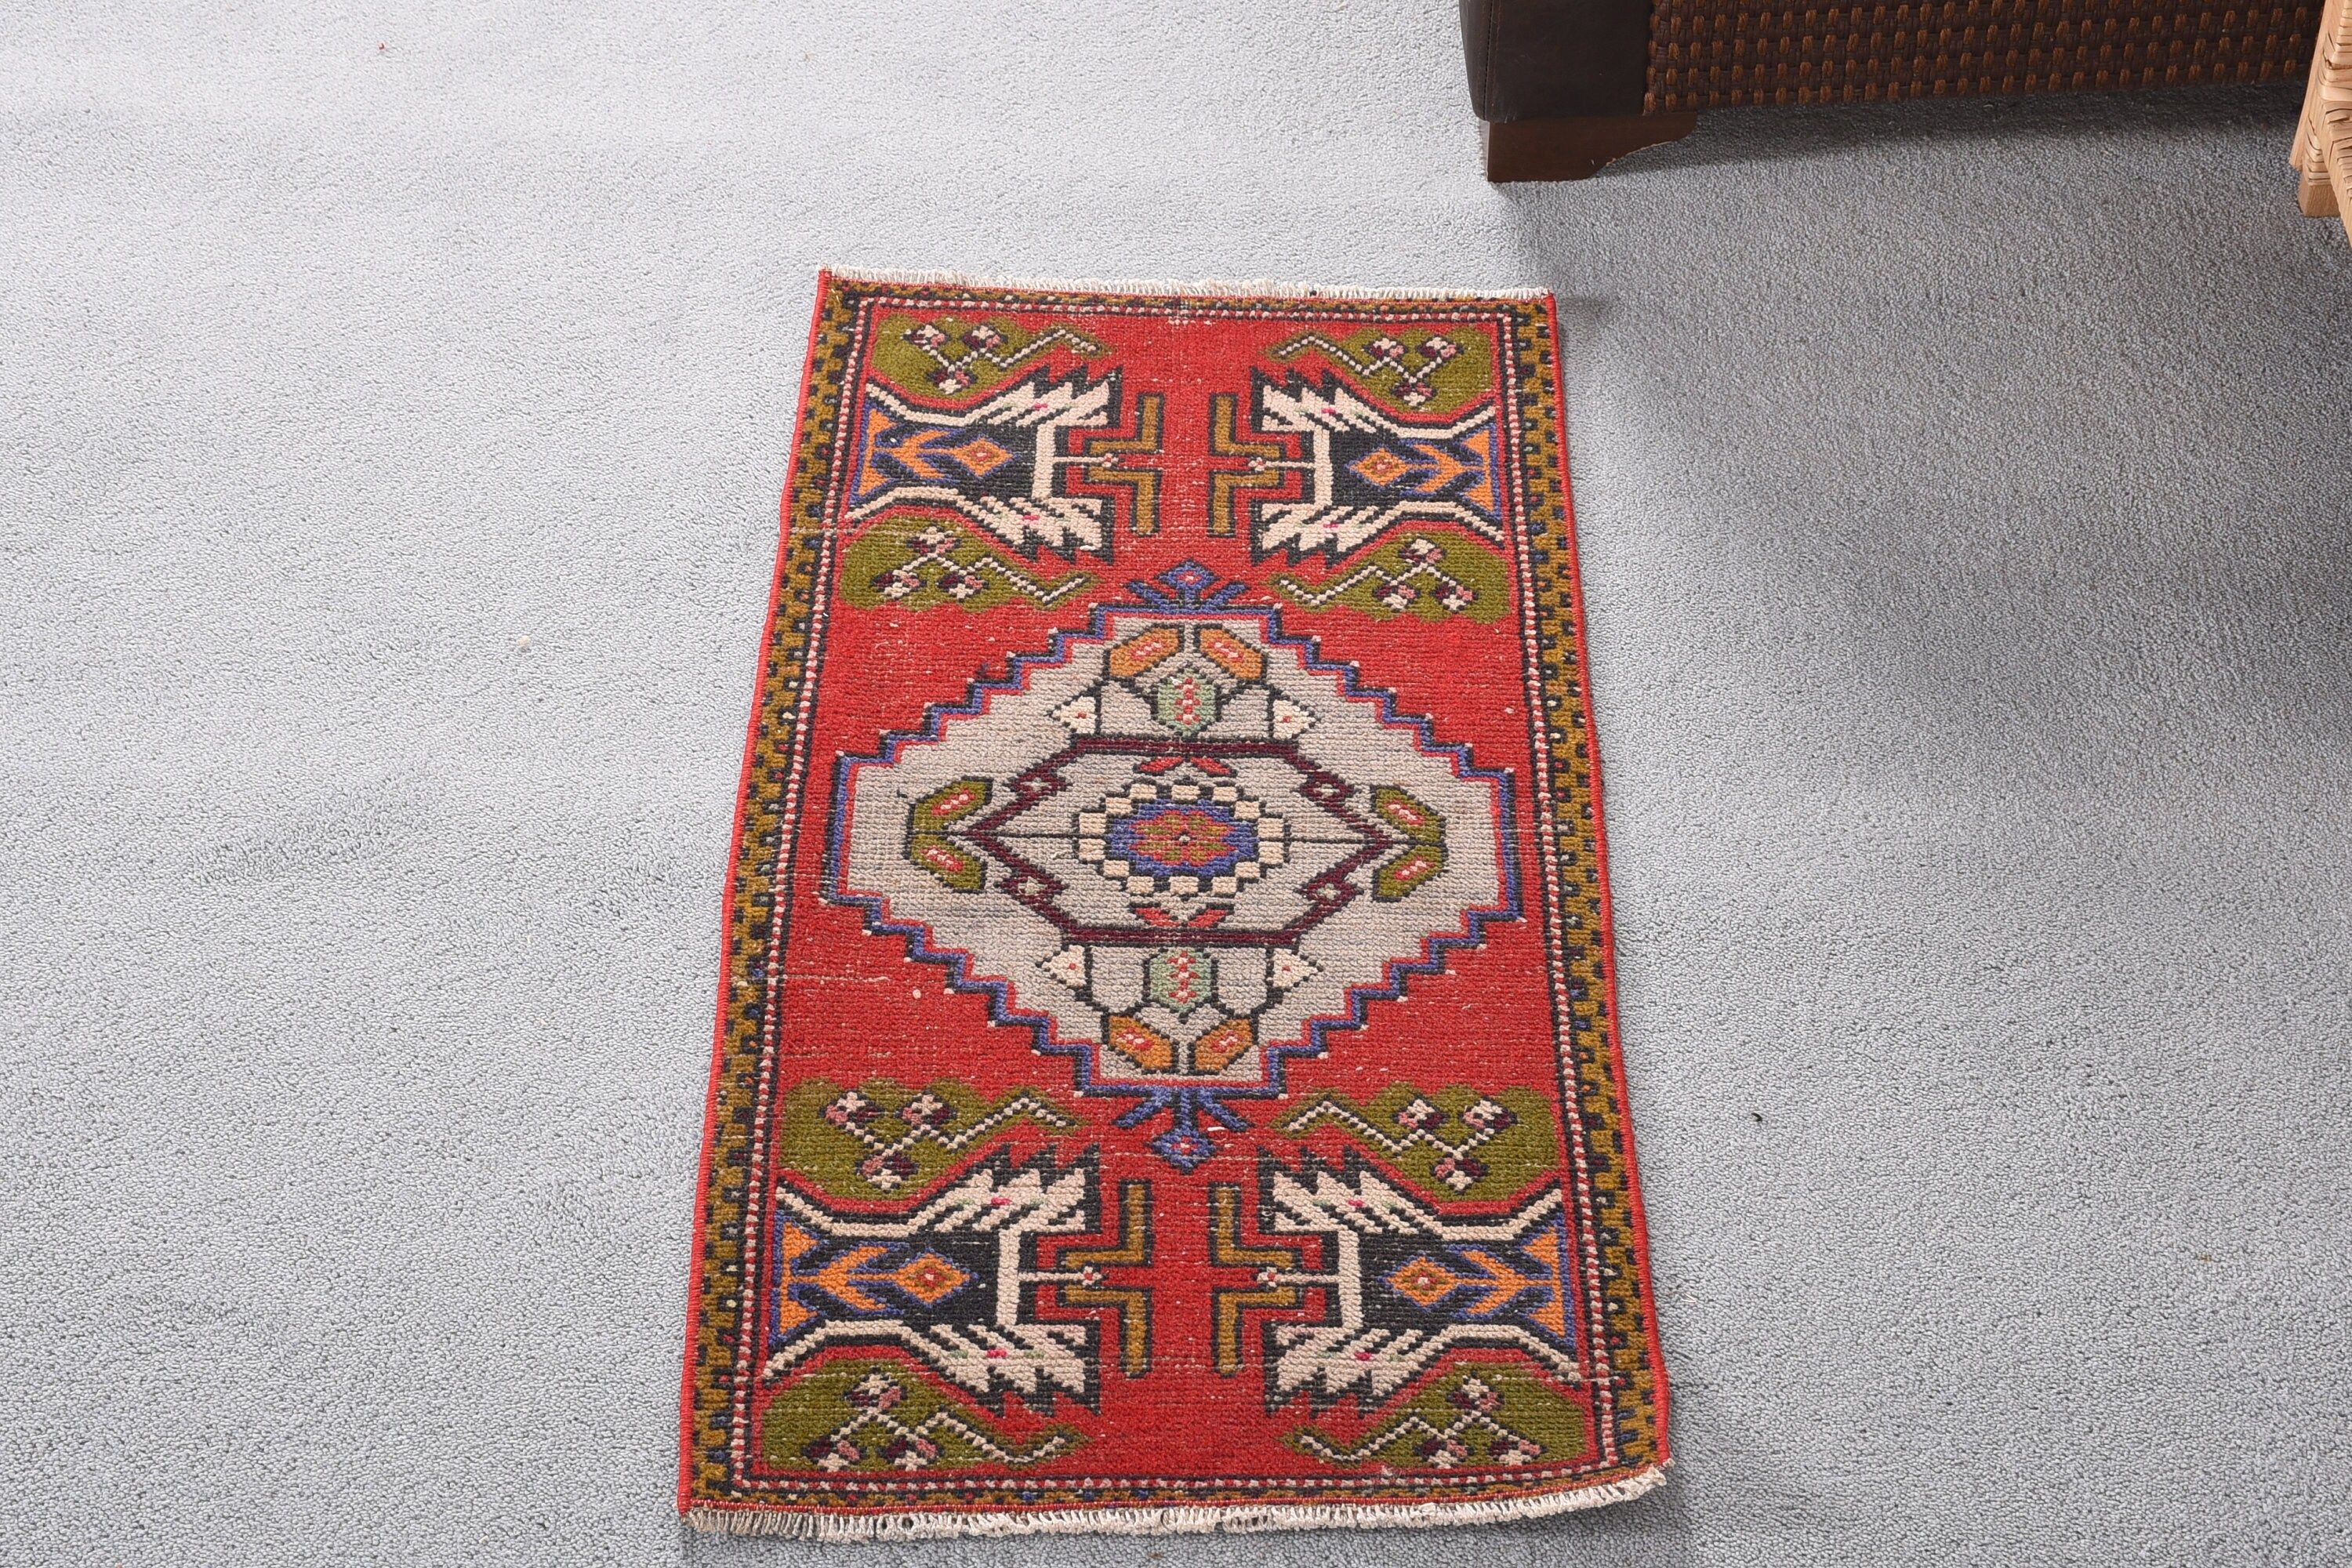 Red Bedroom Rugs, Turkish Rugs, Anatolian Rug, Vintage Rug, Rugs for Entry, Wall Hanging Rugs, Old Rug, 1.5x3.2 ft Small Rug